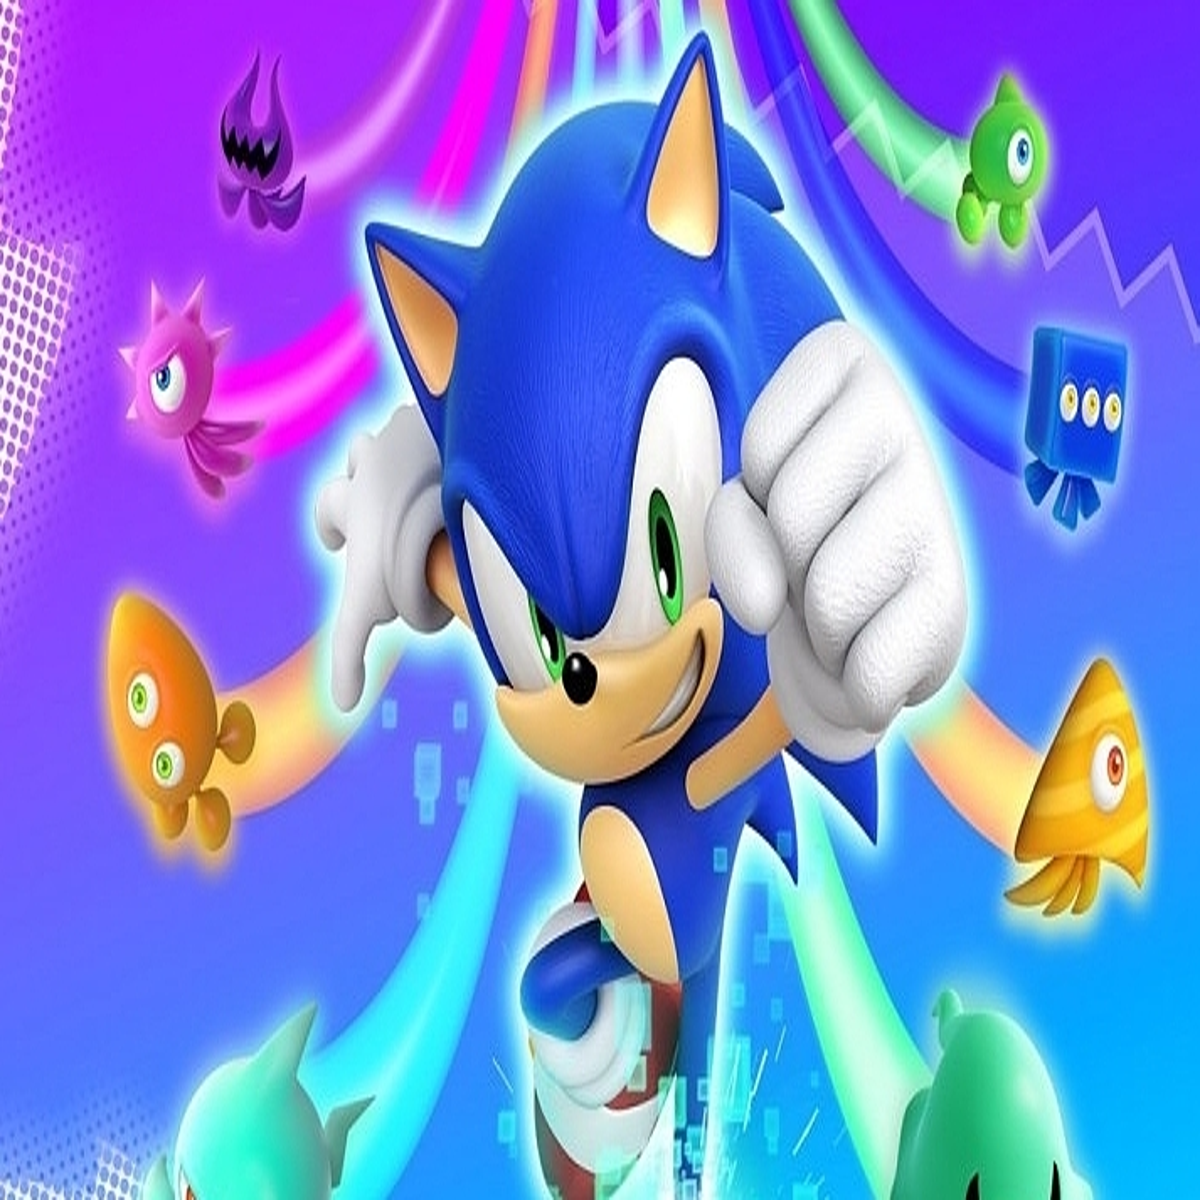 Jogo Sonic Colors ultimate Xbox One